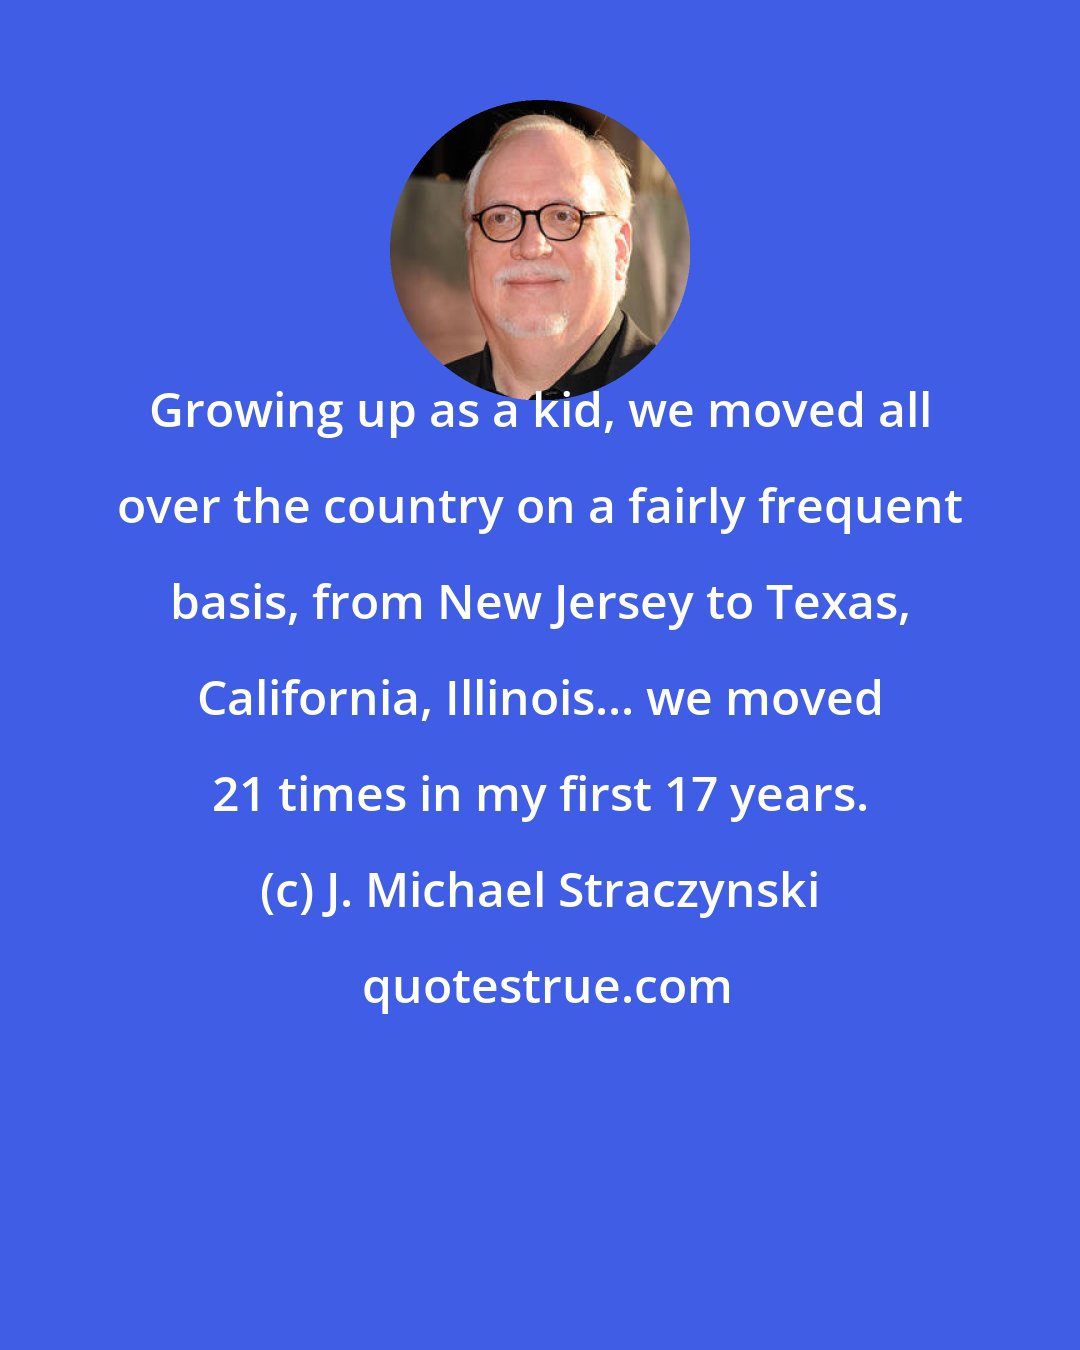 J. Michael Straczynski: Growing up as a kid, we moved all over the country on a fairly frequent basis, from New Jersey to Texas, California, Illinois... we moved 21 times in my first 17 years.